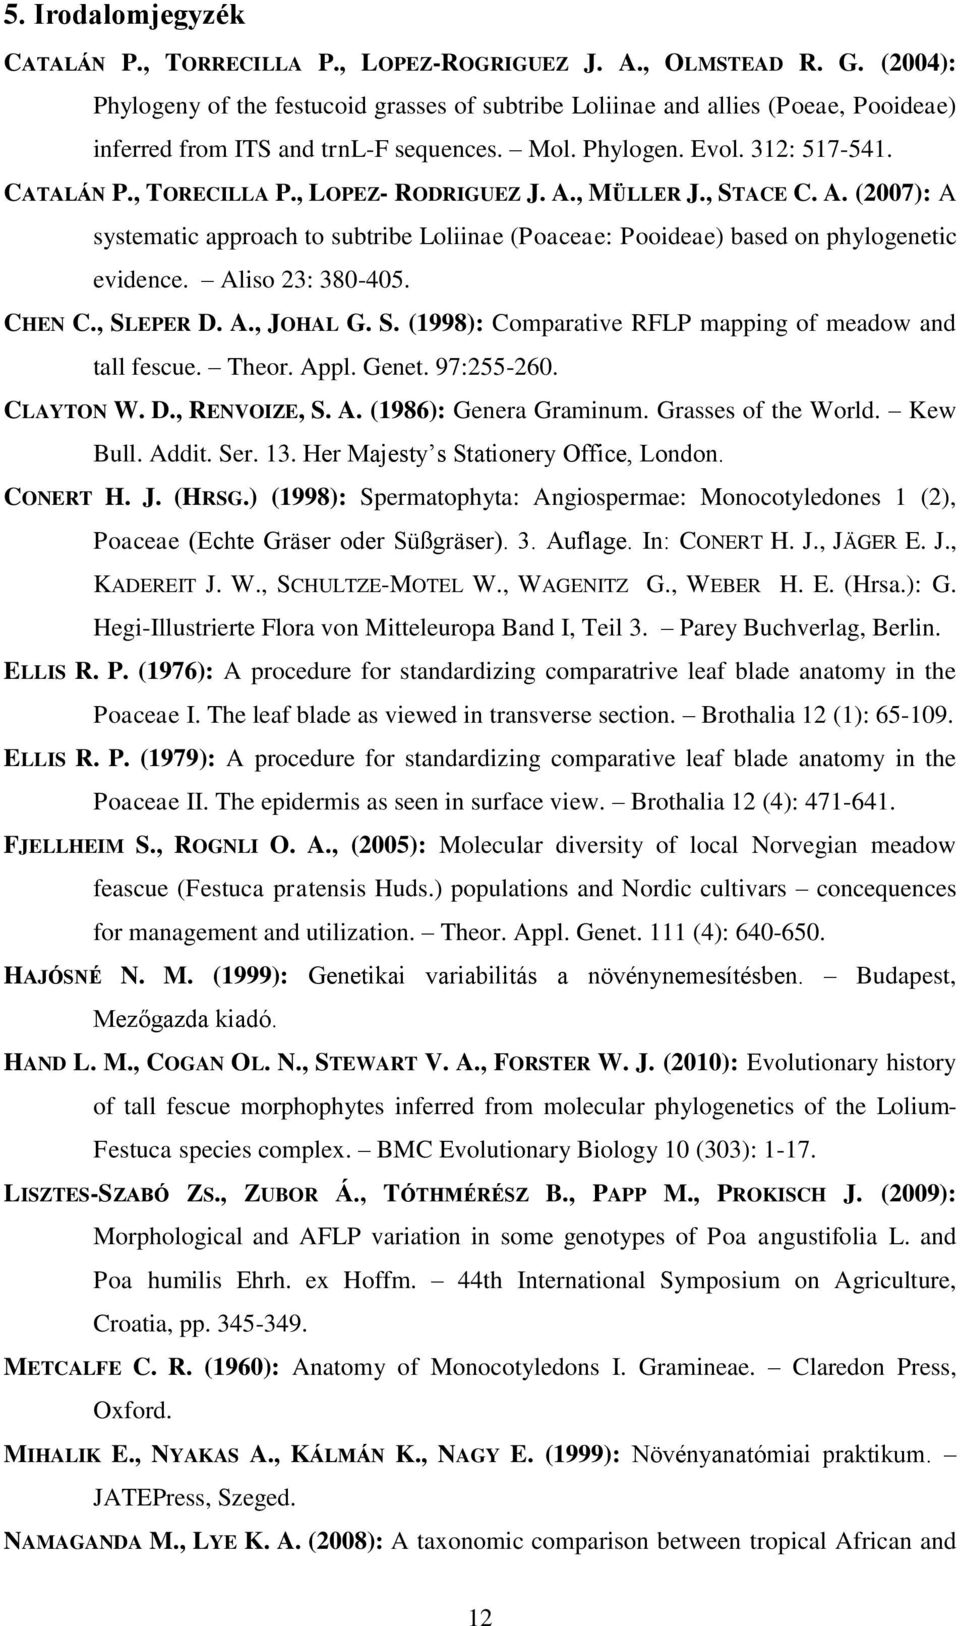 , LOPEZ- RODRIGUEZ J. A., MÜLLER J., STACE C. A. (2007): A systematic approach to subtribe Loliinae (Poaceae: Pooideae) based on phylogenetic evidence. Aliso 23: 380-405. CHEN C., SLEPER D. A., JOHAL G.